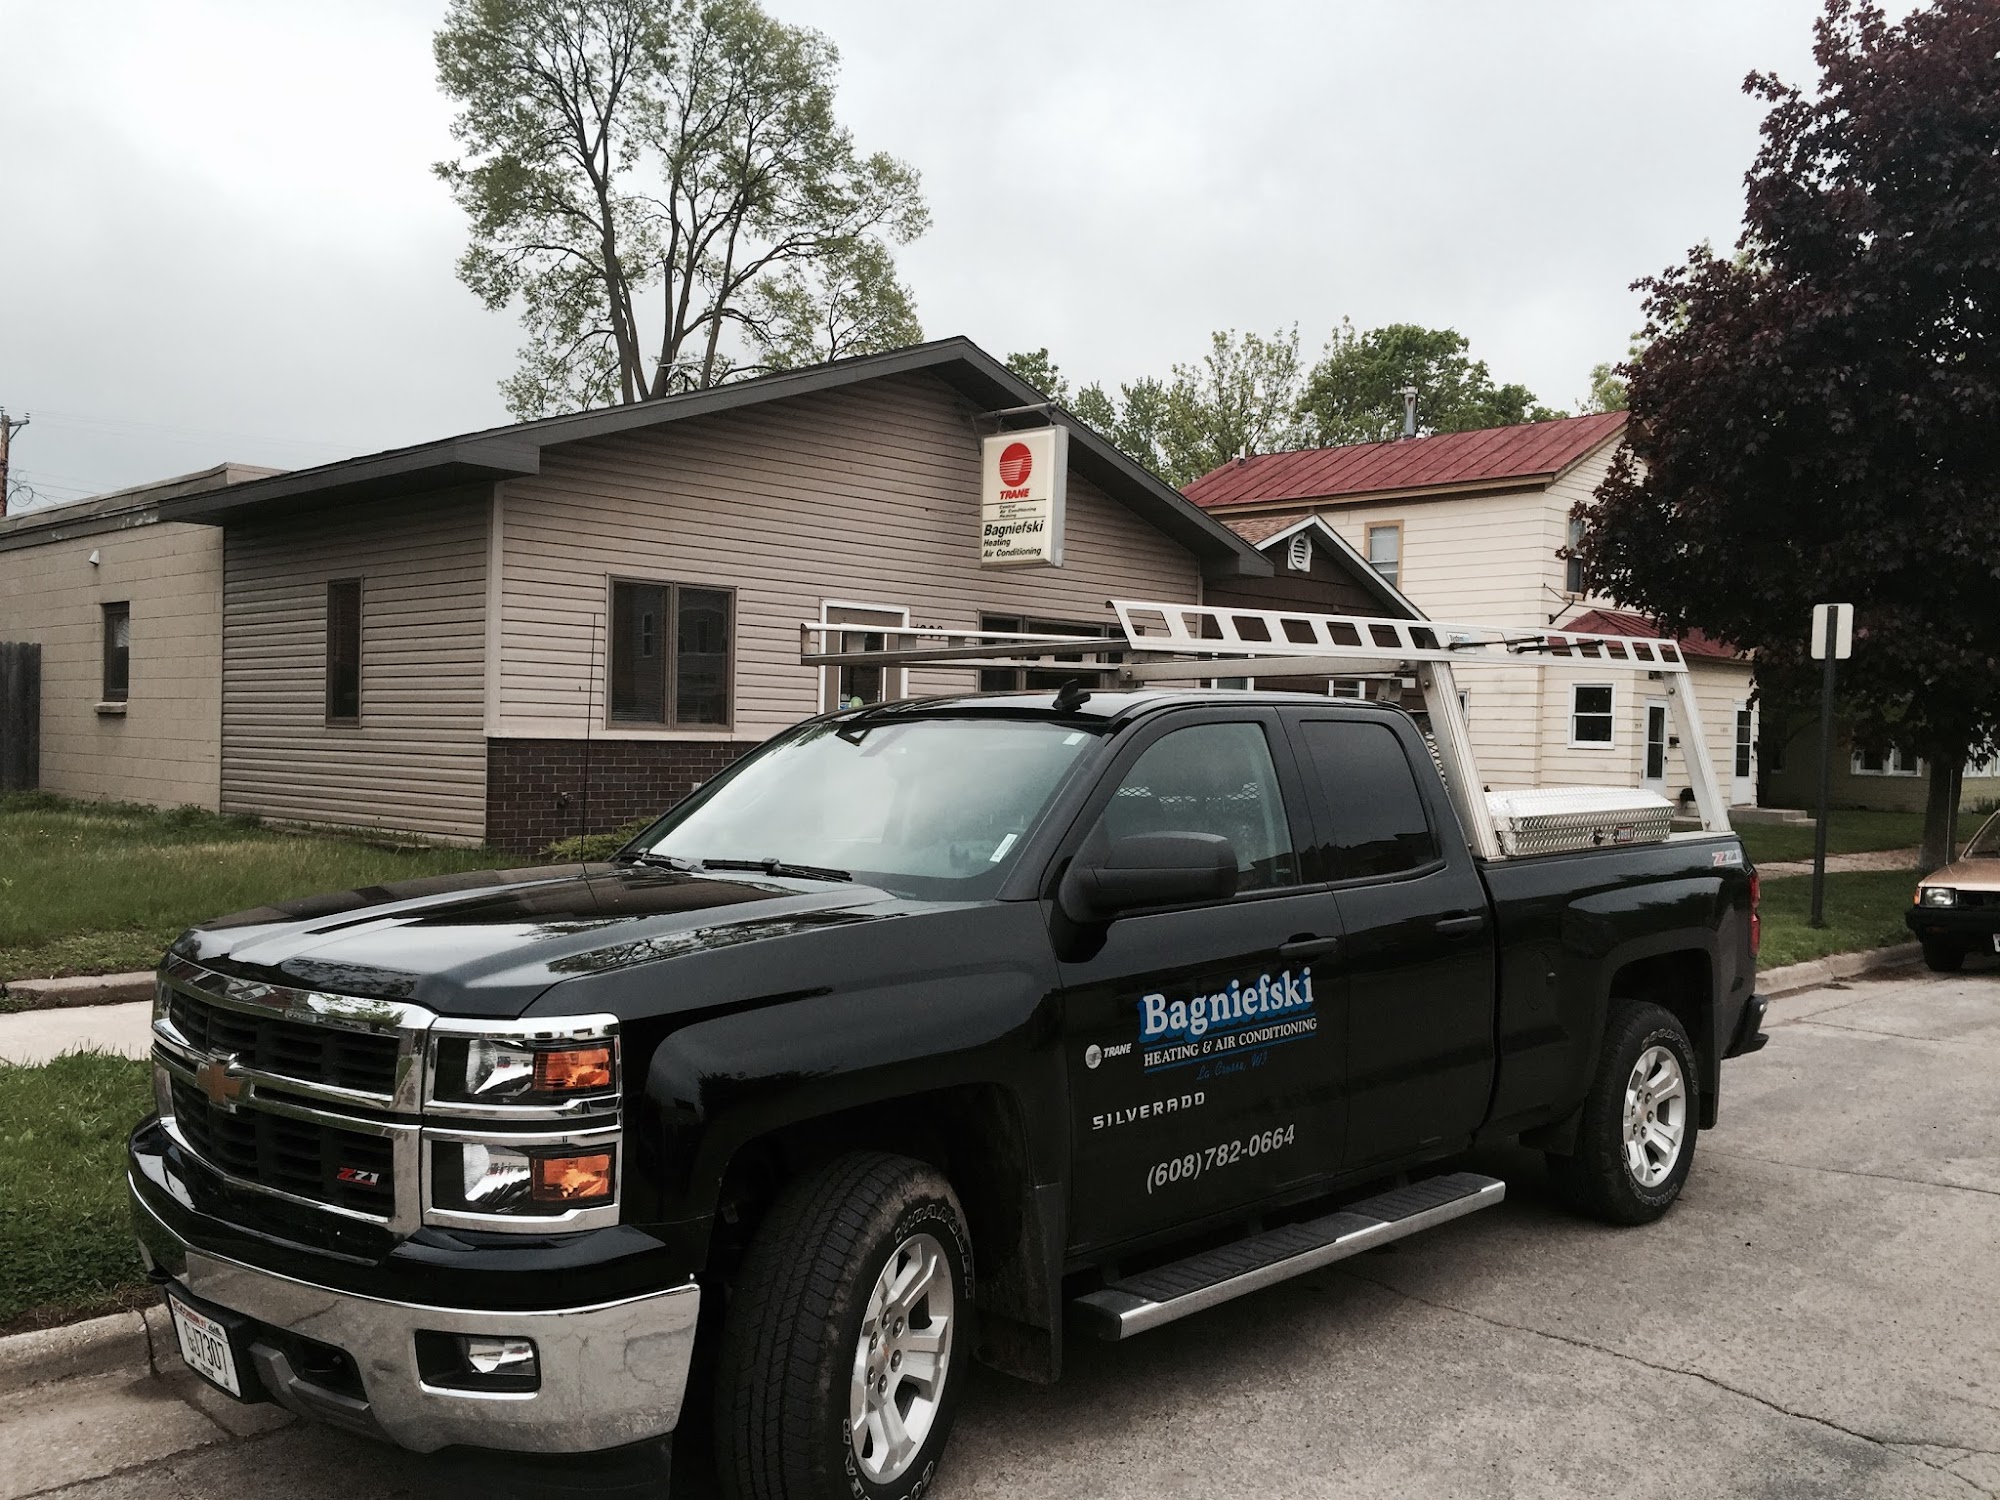 Bagniefski Heating and Air Conditioning